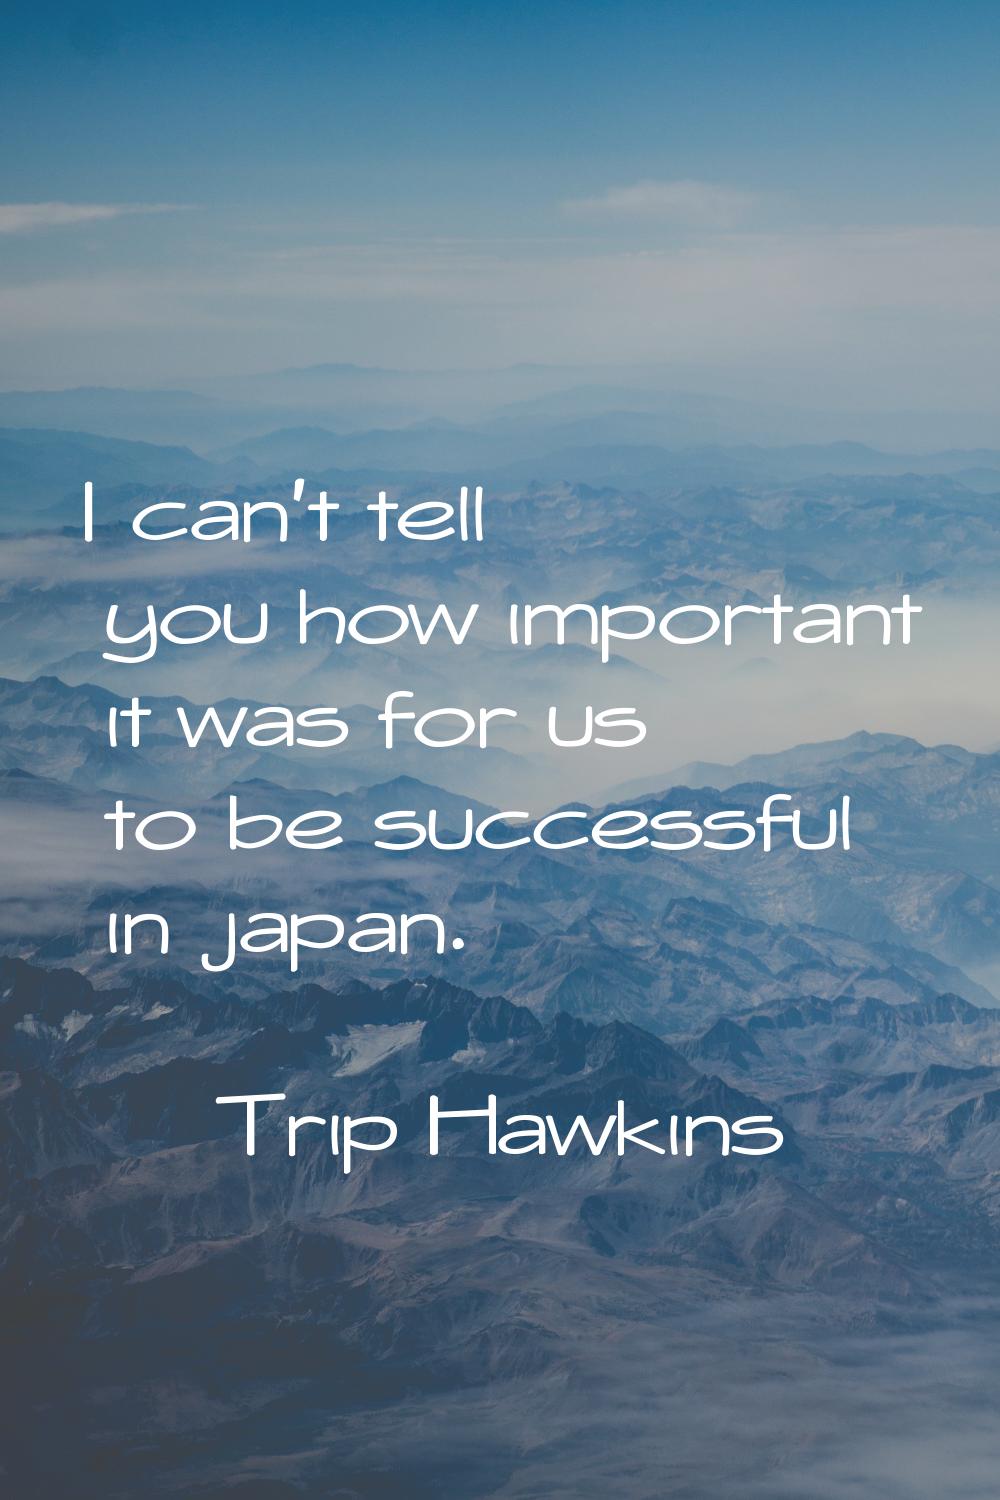 I can't tell you how important it was for us to be successful in japan.